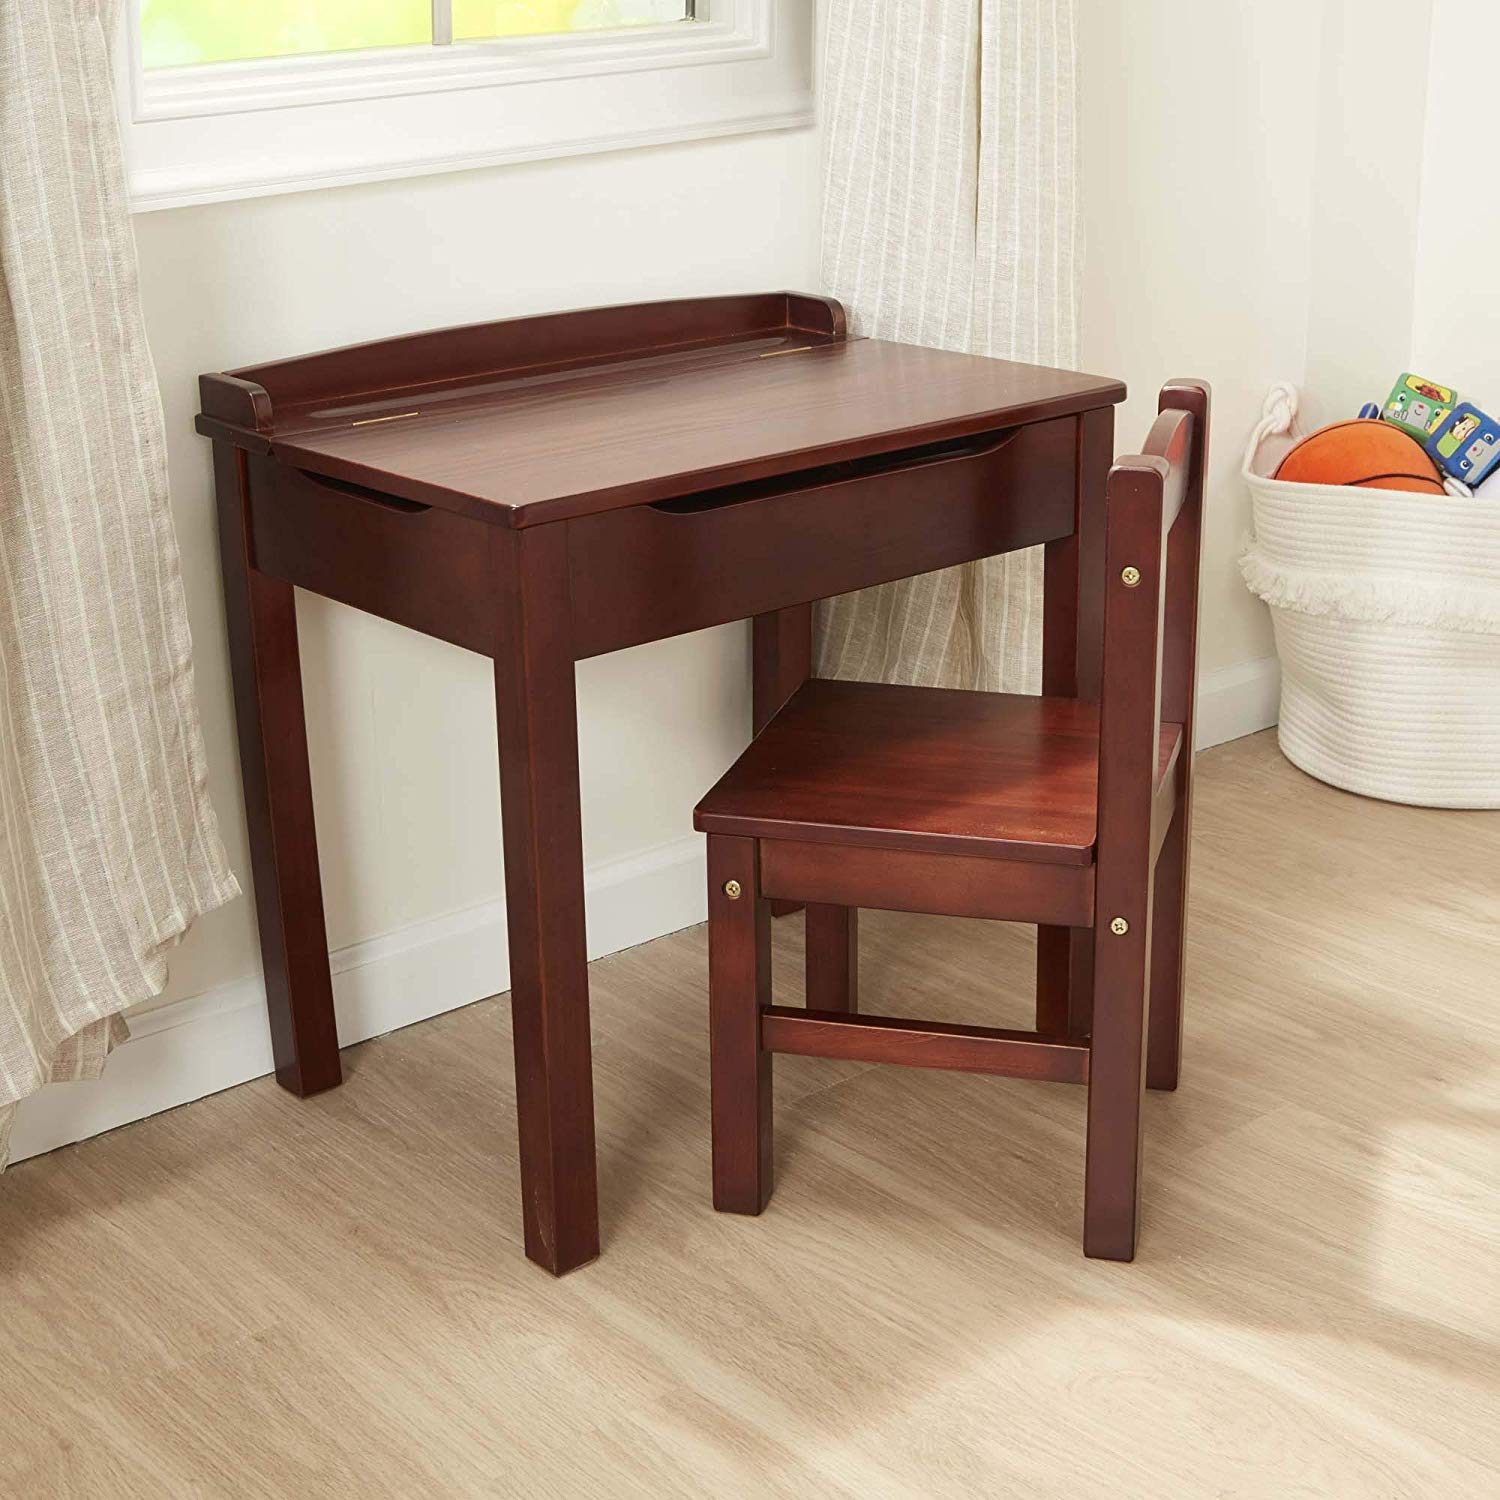 childrens wooden desk and chair